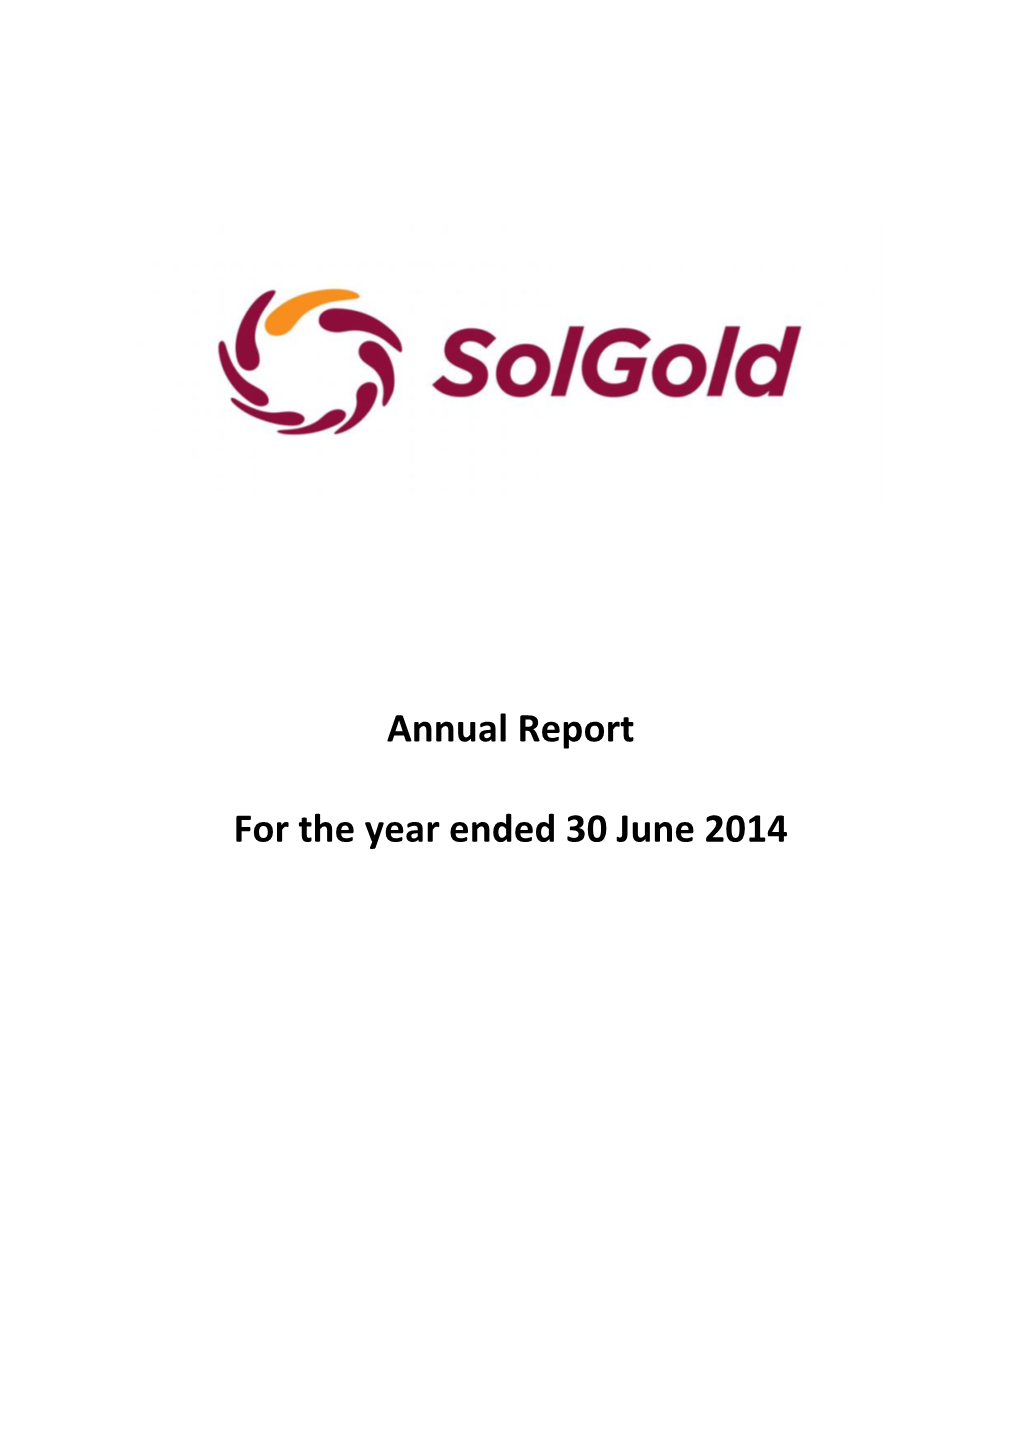 Annual Report for the Year Ended 30 June 2014 3 CHAIRMAN’S STATEMENT